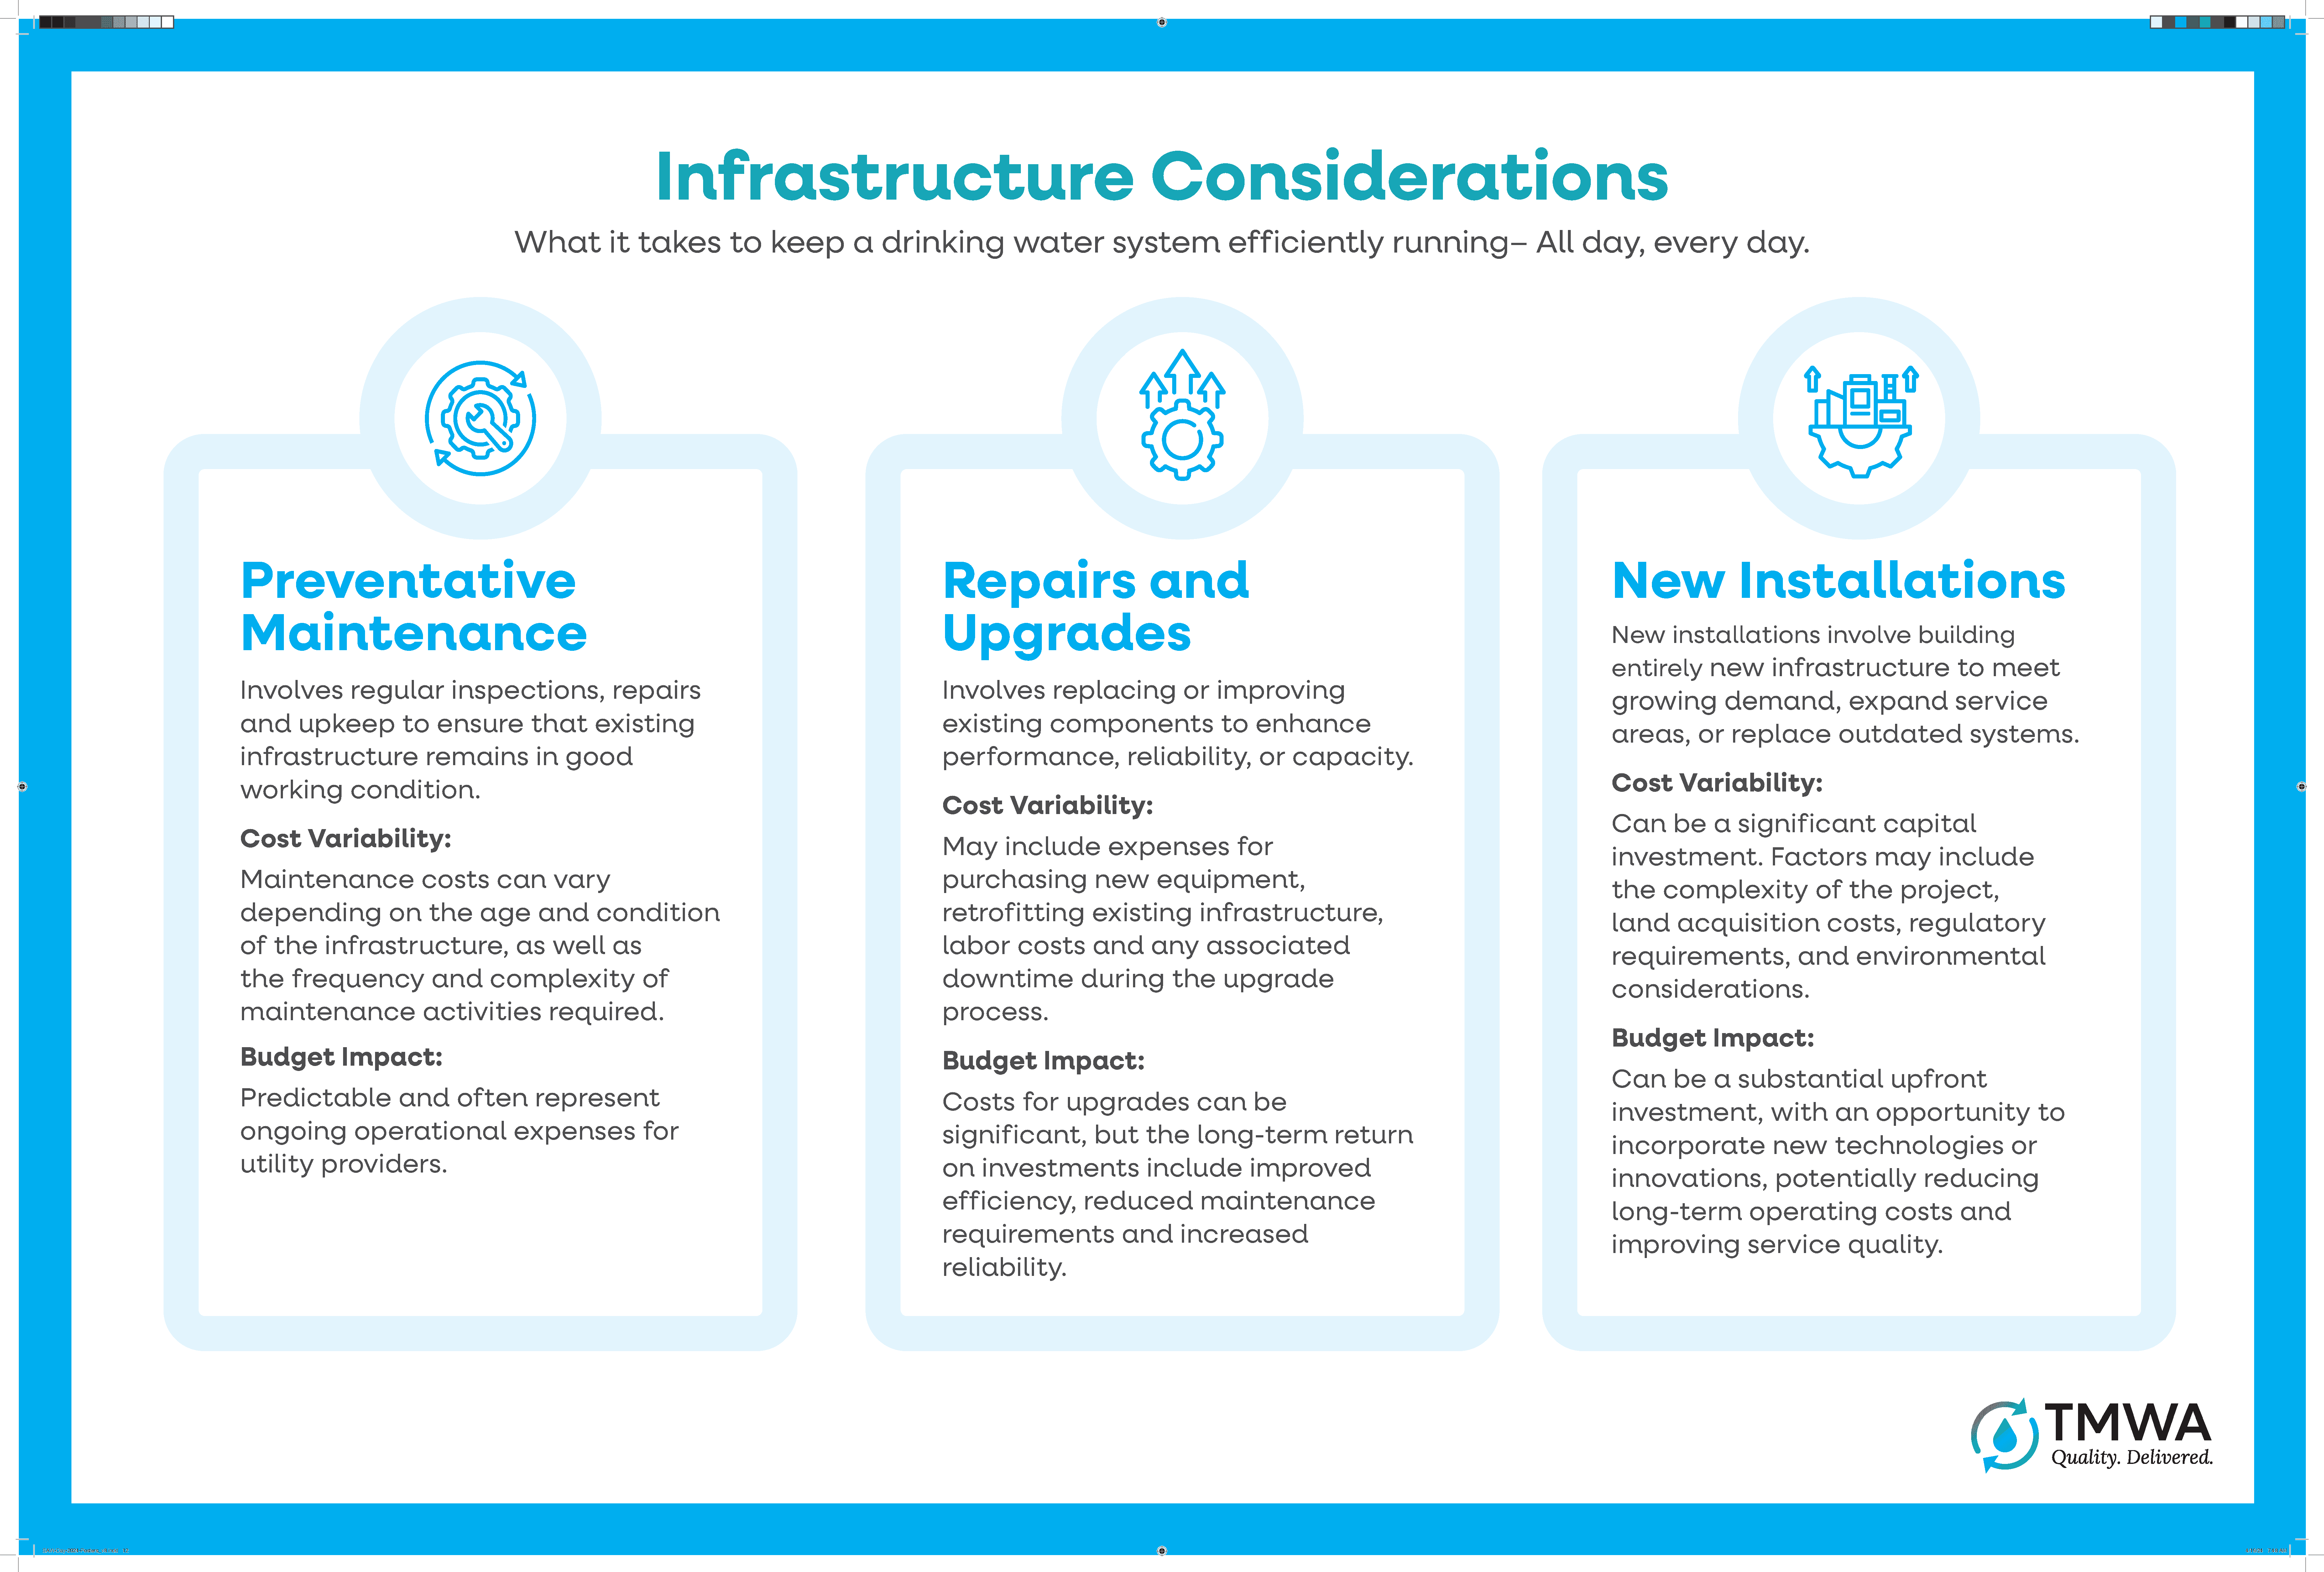 Infrastructure Expense Considerations: Maintain, Replace, New Build